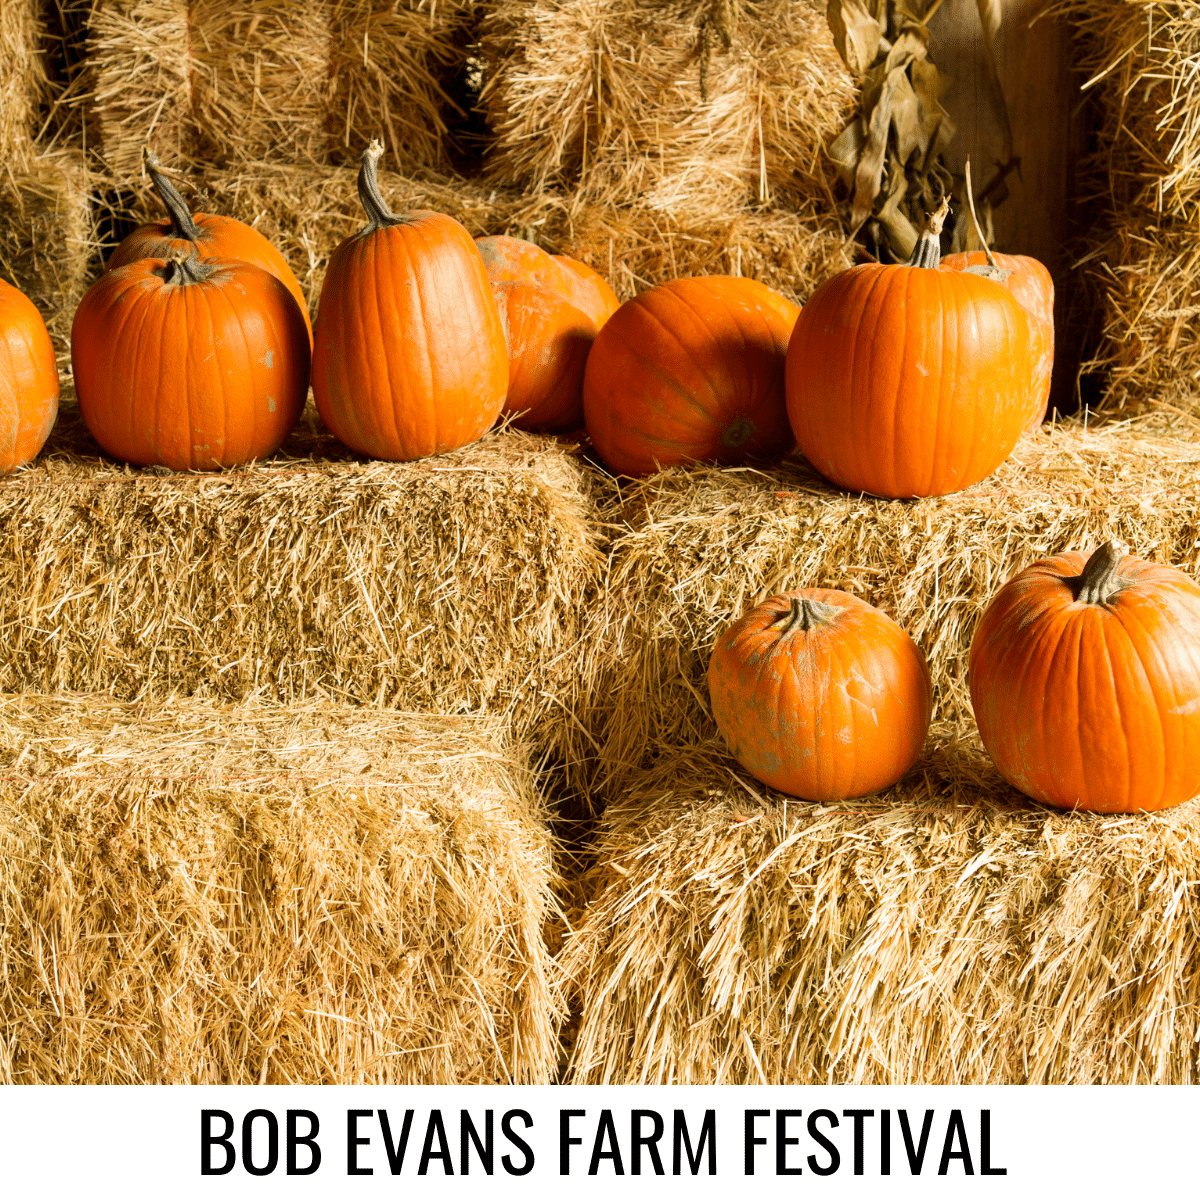 square image with a photo of orange pumpkins displayed on bales of hay. A white strip at the bottom has the text Bob Evans Farm Festival. Image via Canva pro license